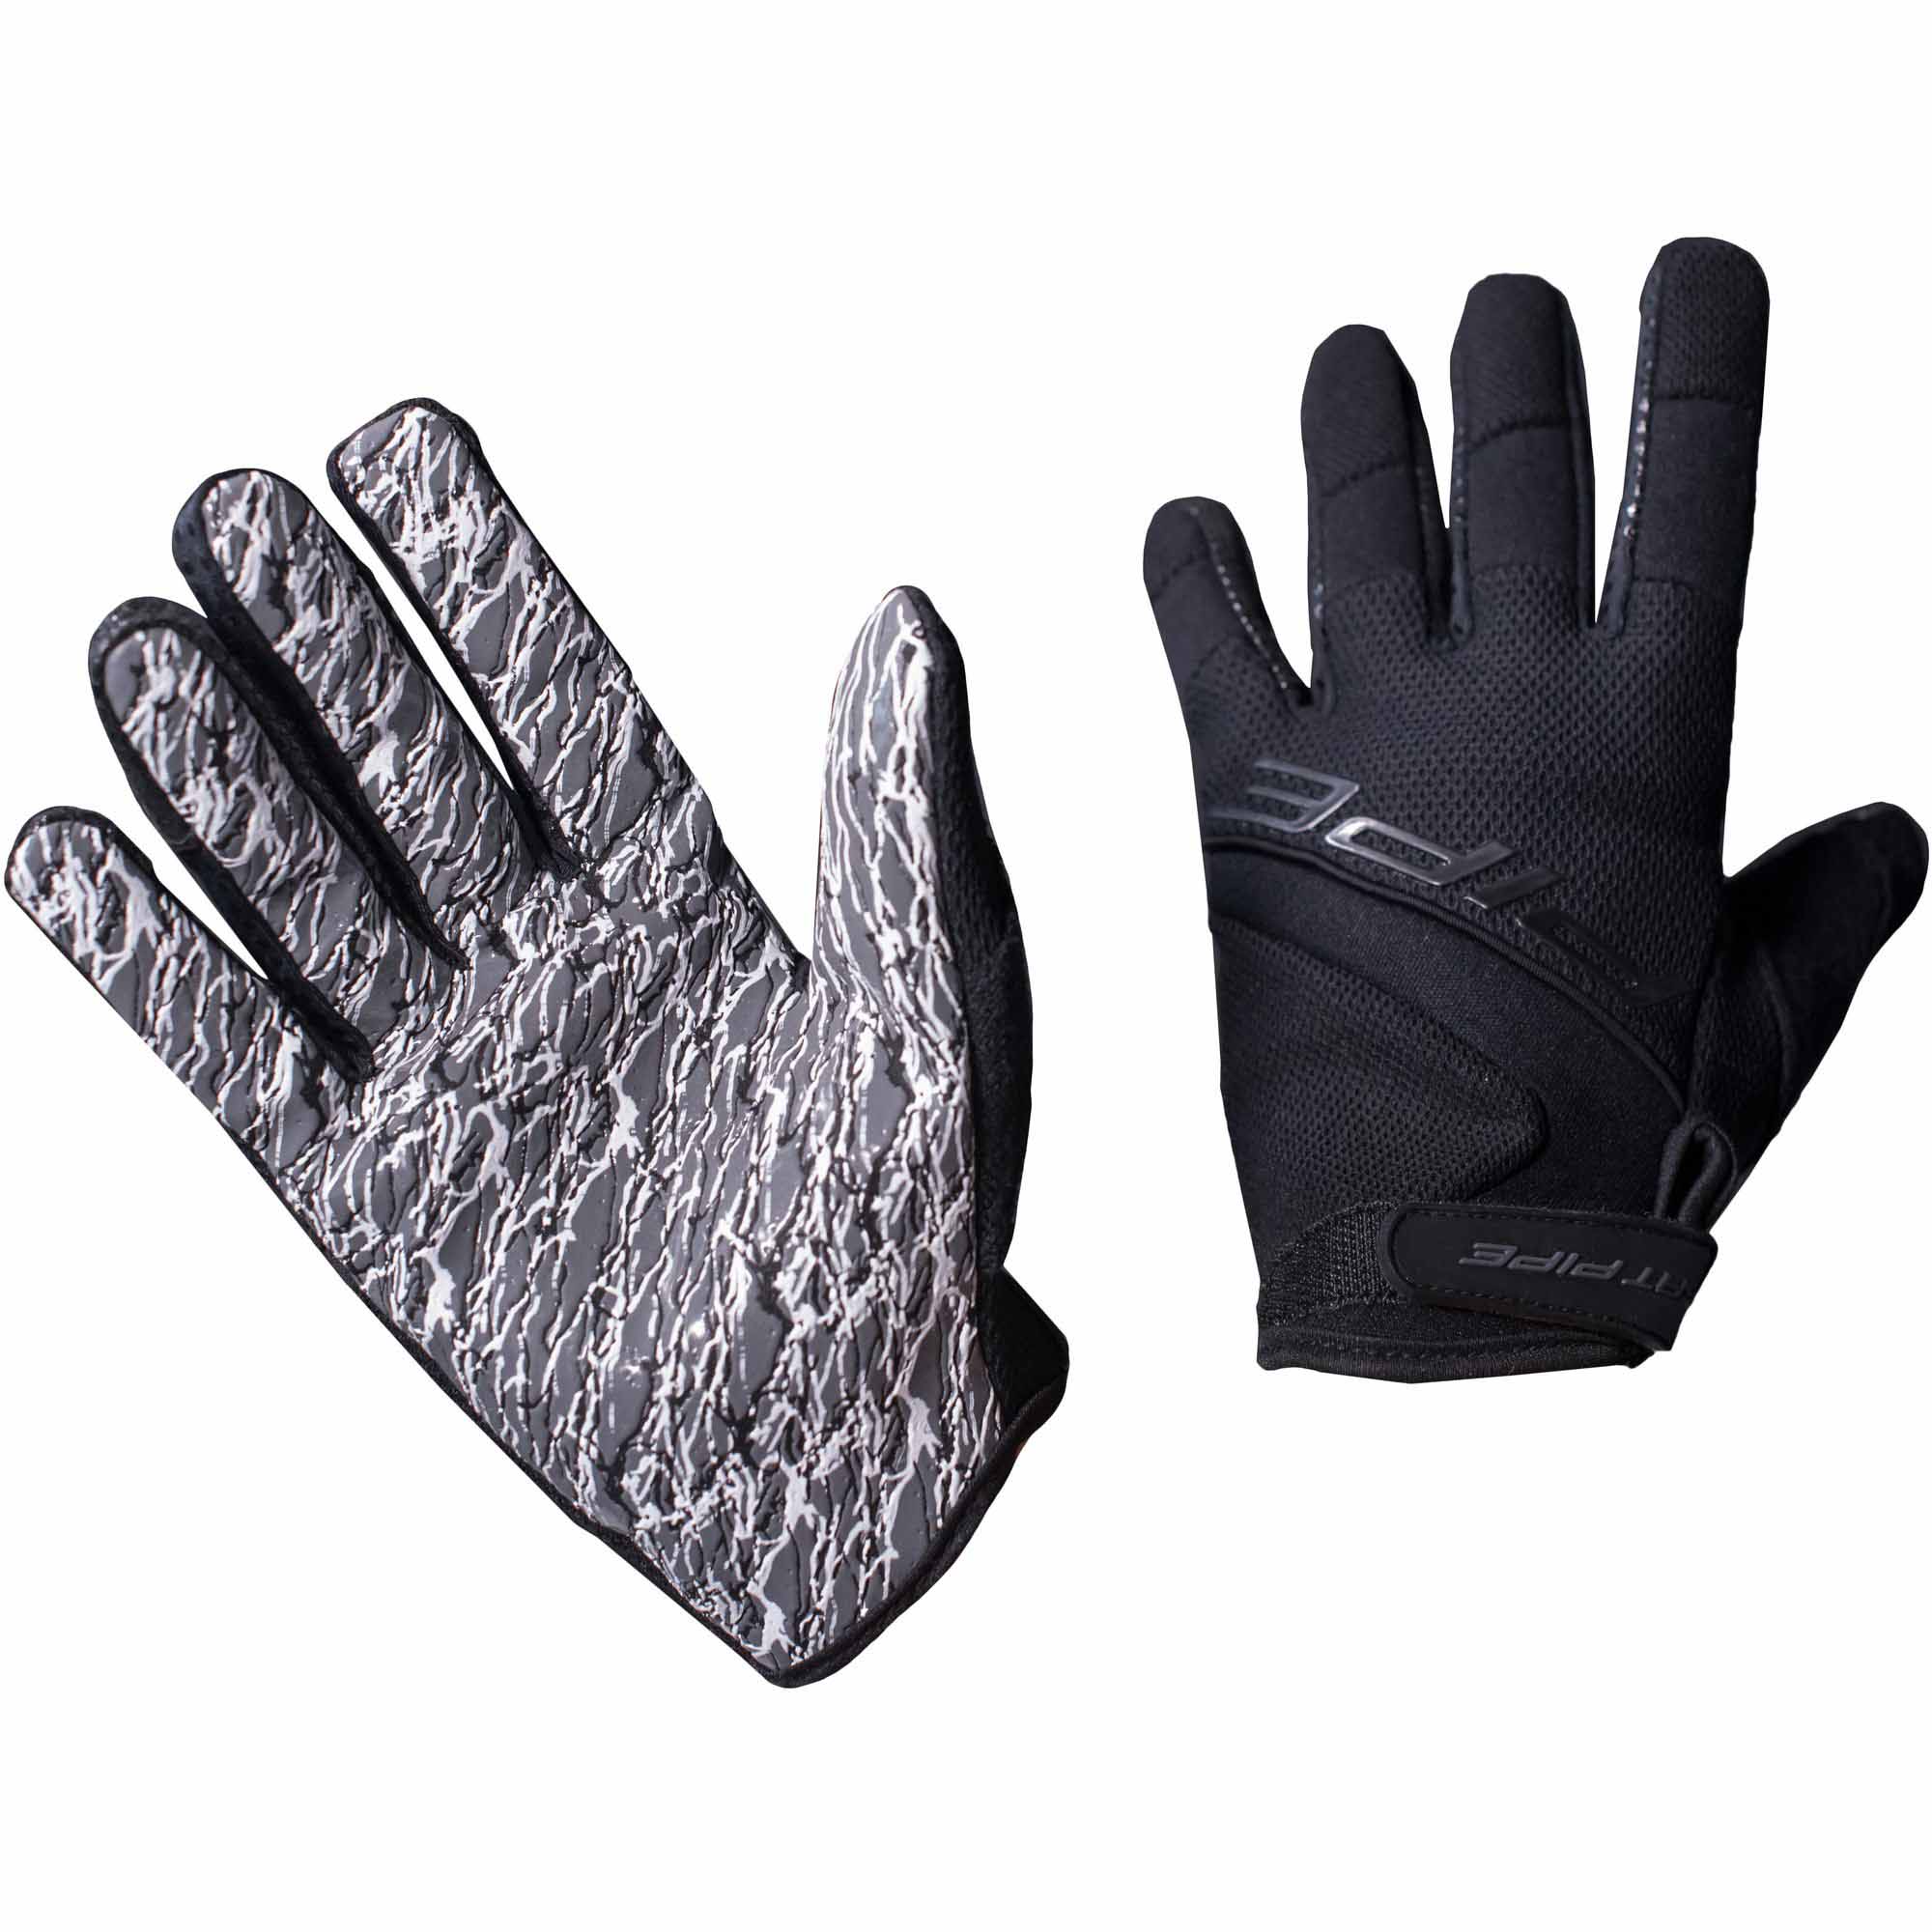 GK-Gloves with Silicone JR